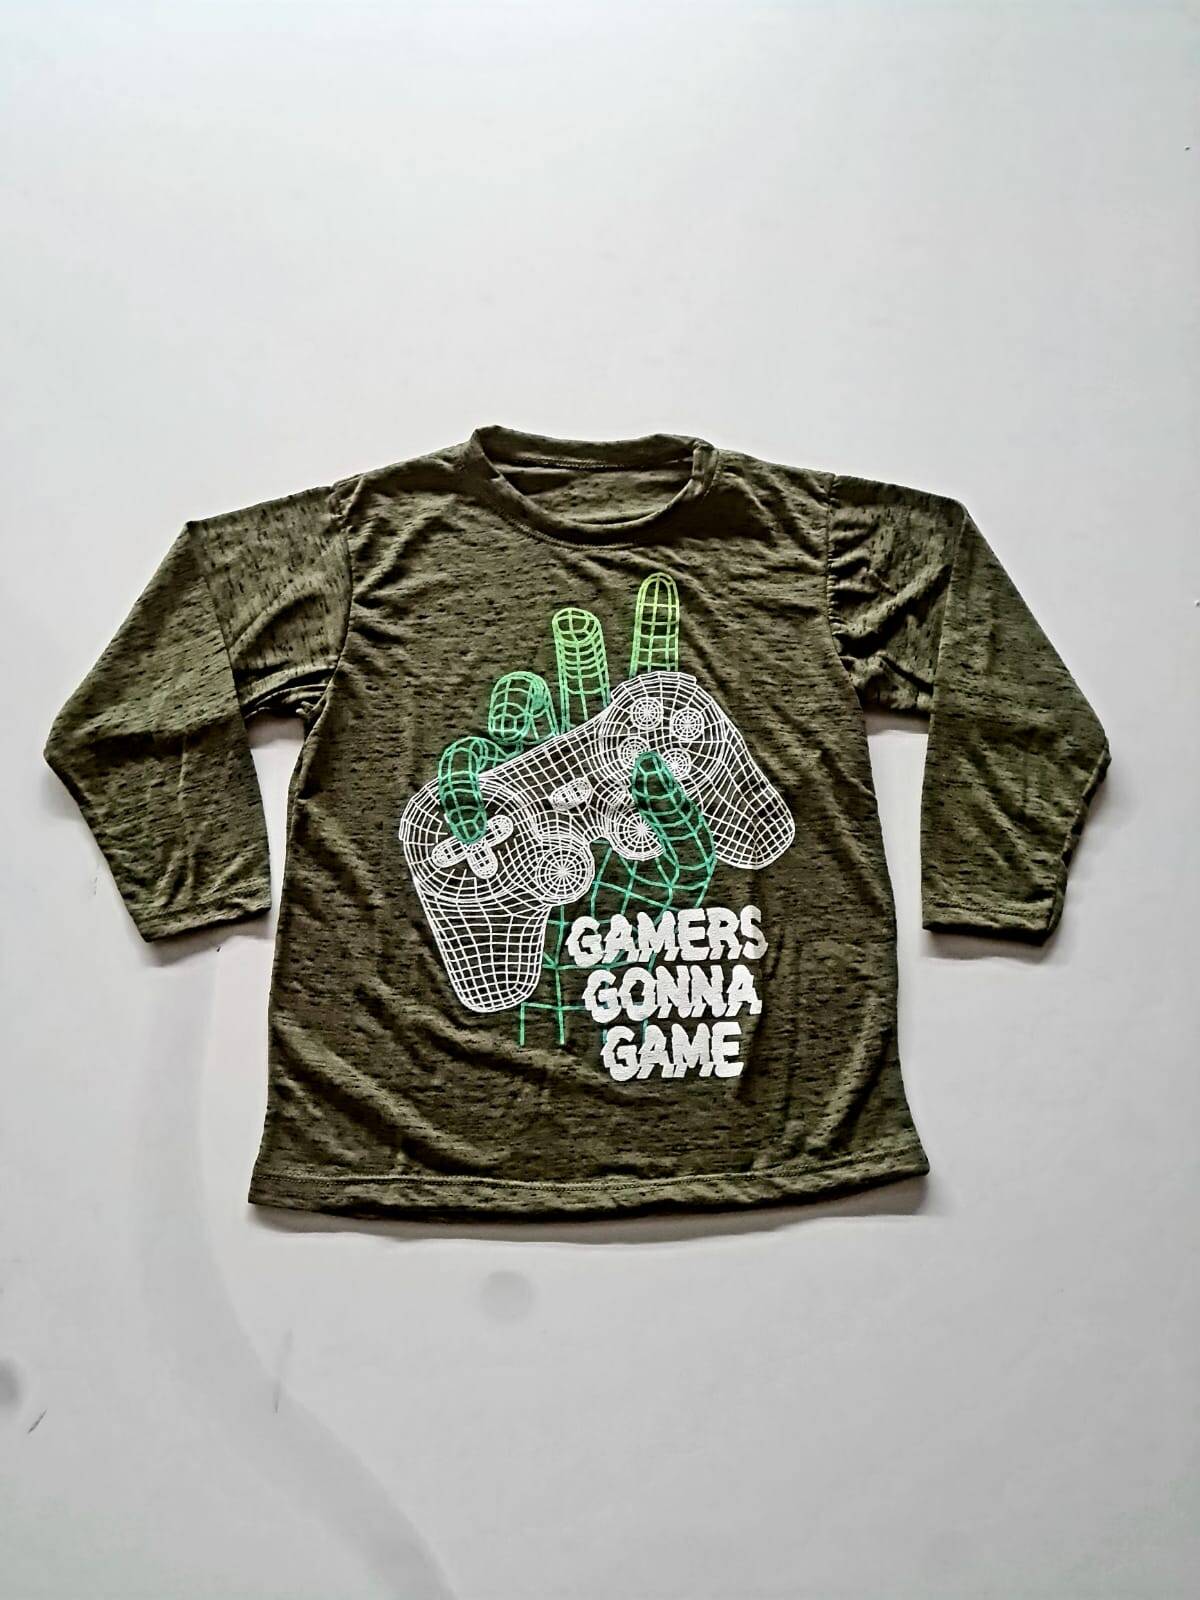 Imagen producto Remera gamers gonna game Nene 9